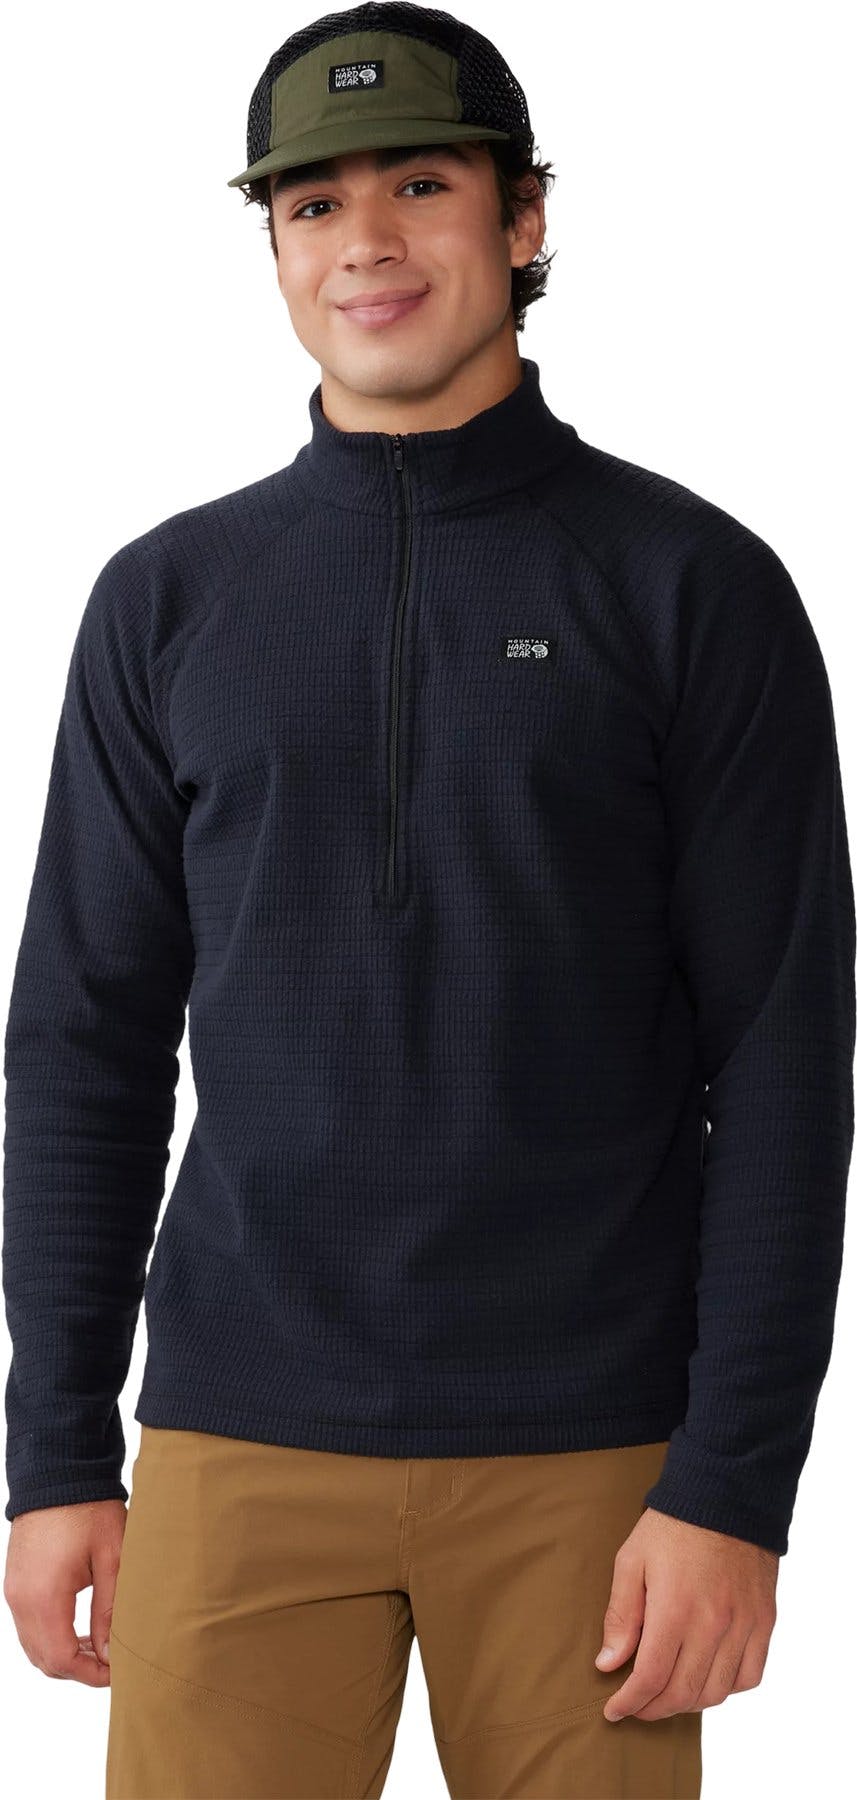 Product image for Summit Grid 1/2 Zip - Men's